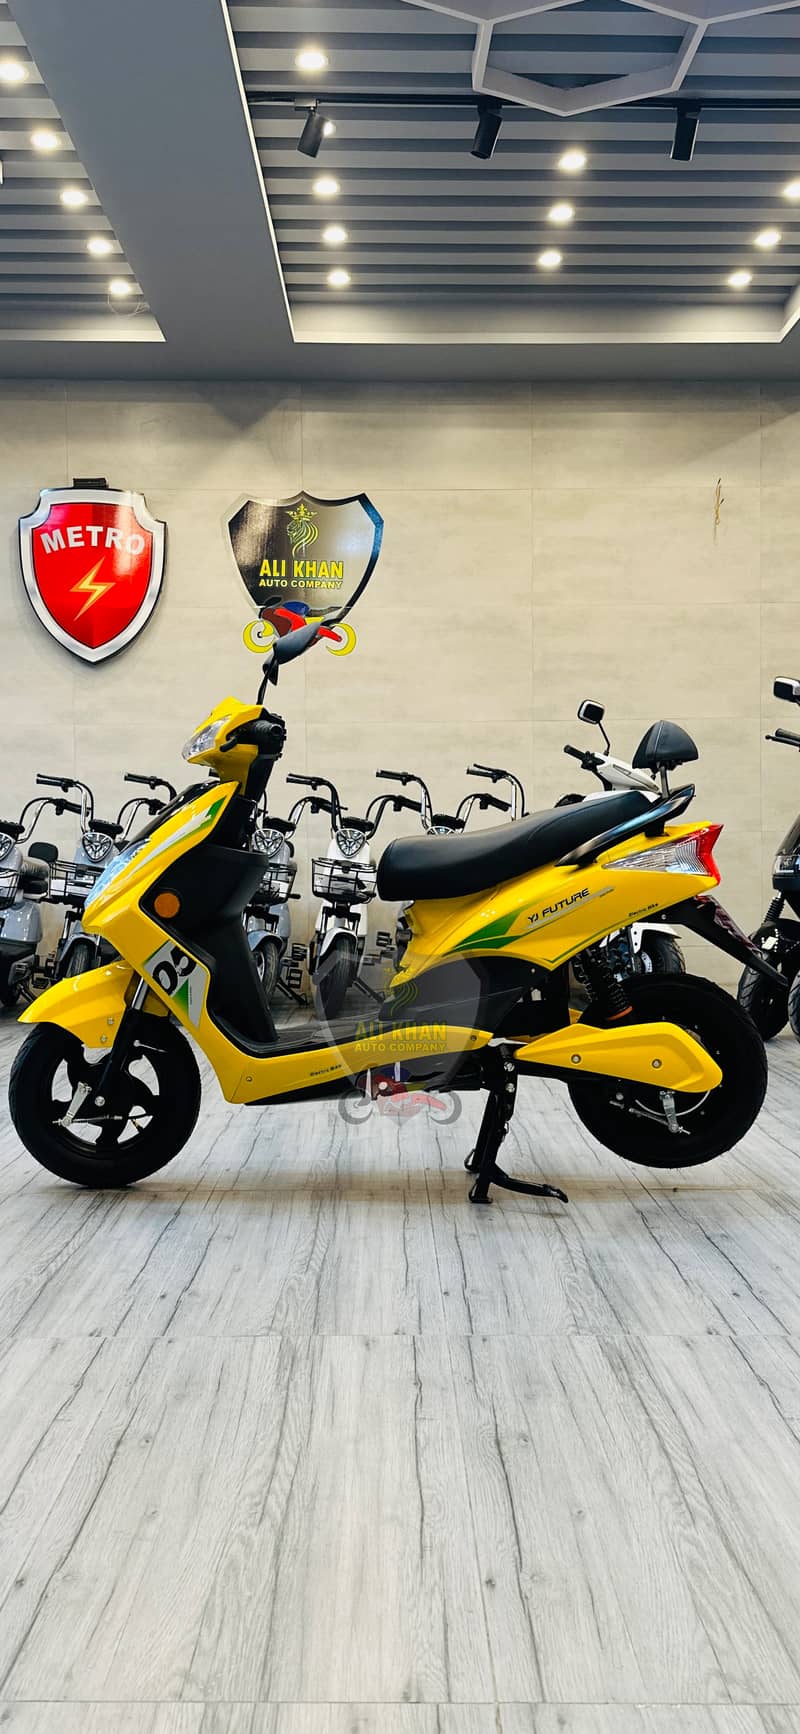 ALI LHAN AUTO COMPANY SCOOTY SCOOTER GIRLS LADIES BOYS MALE 4